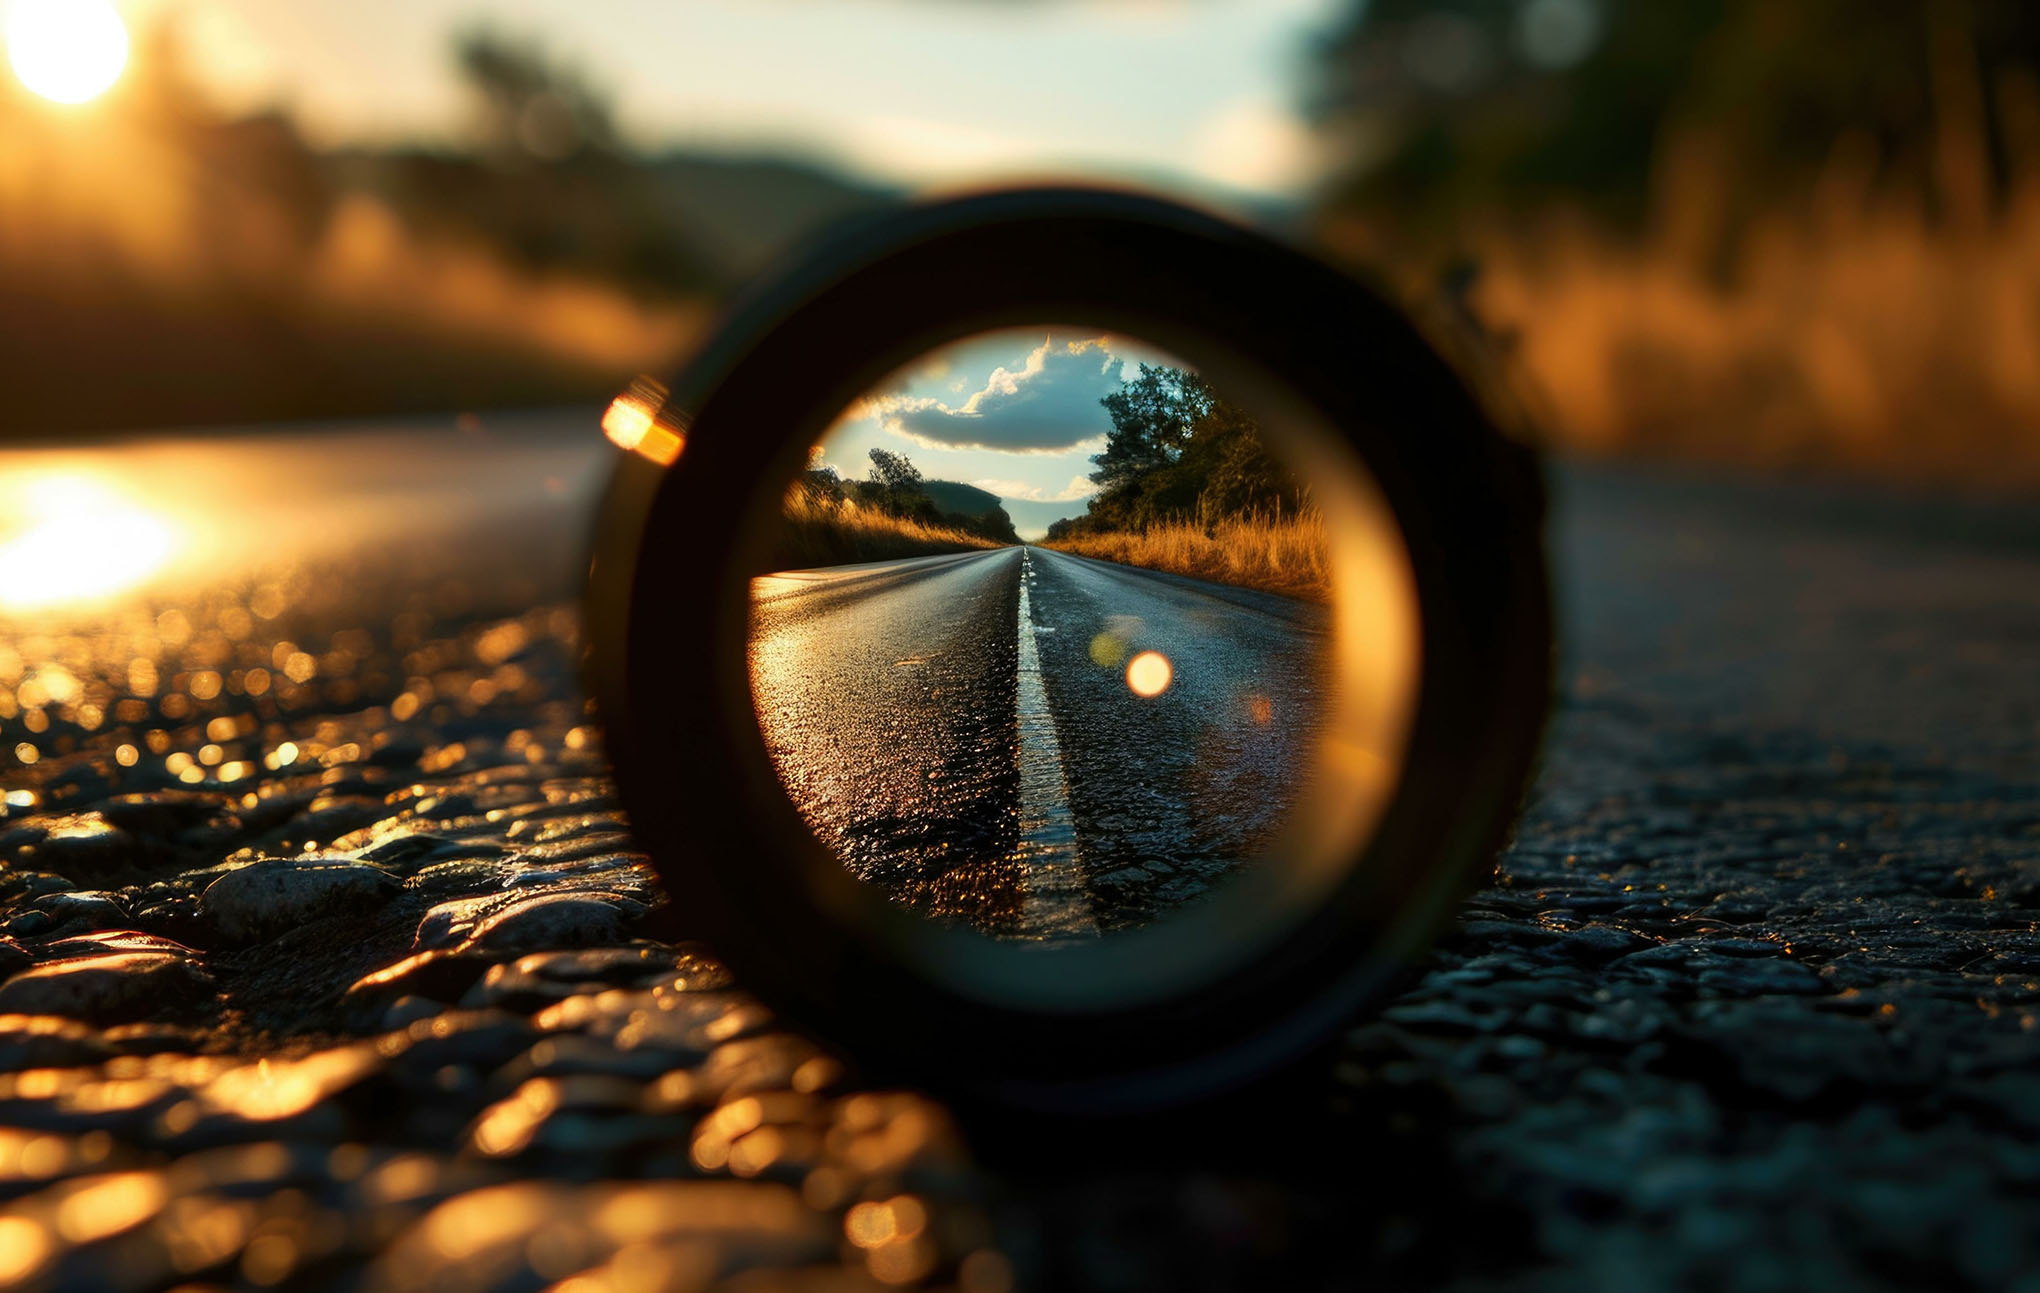 A camera lens placed on a road captures a sunset reflected in its glass, focusing on the vivid sky and a straight road stretching toward the horizon, surrounded by lush greenery under a golden light.